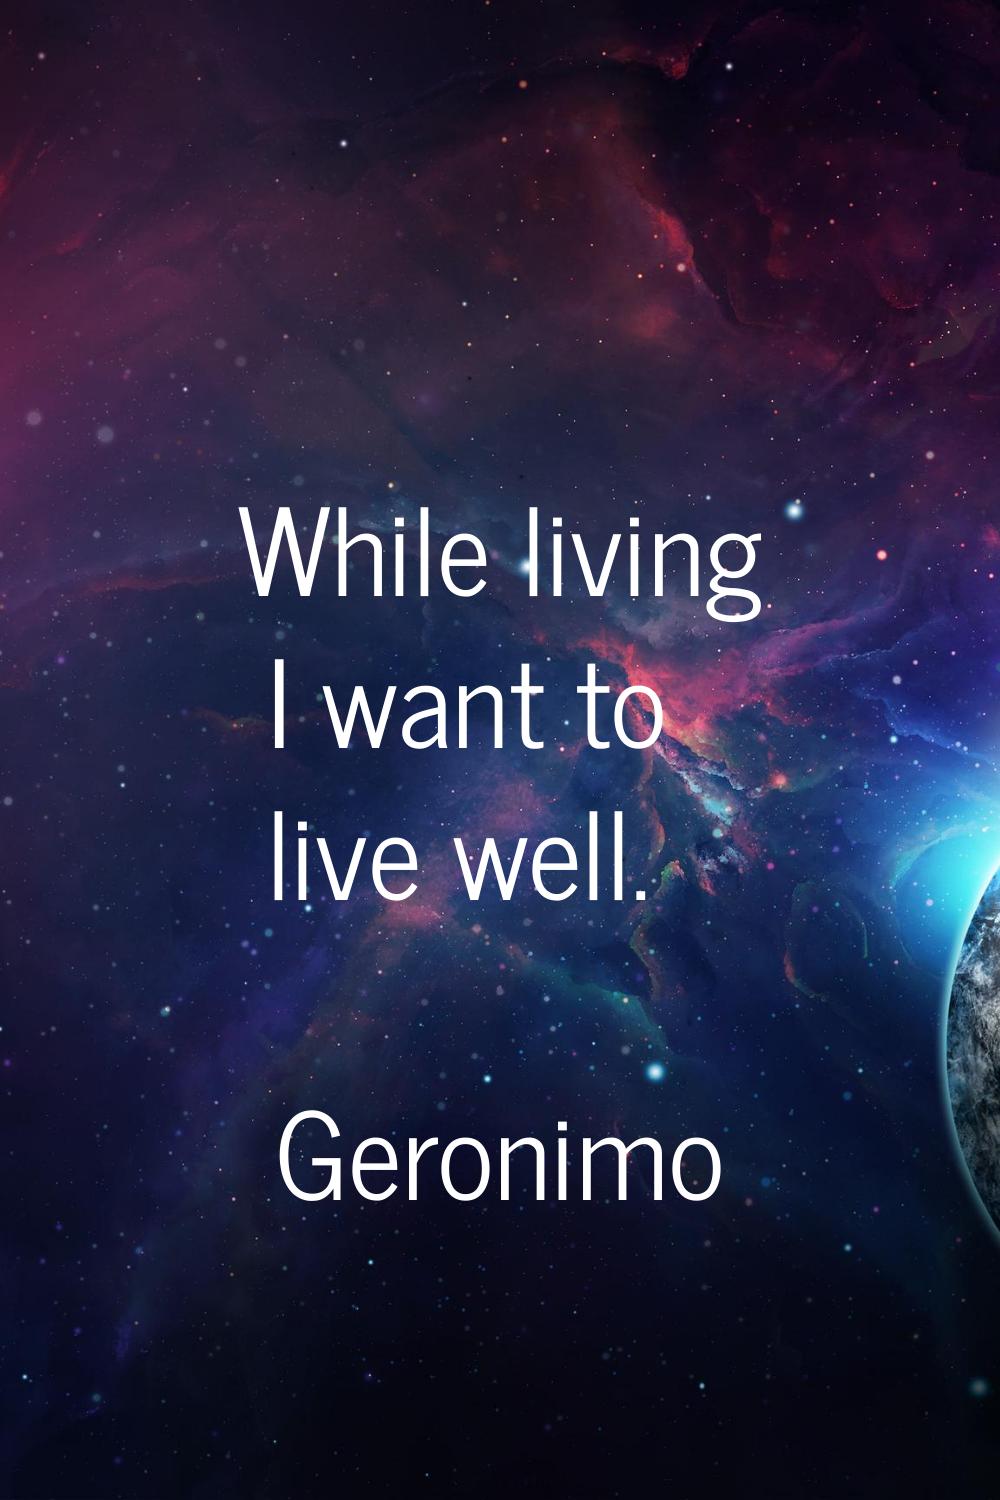 While living I want to live well.